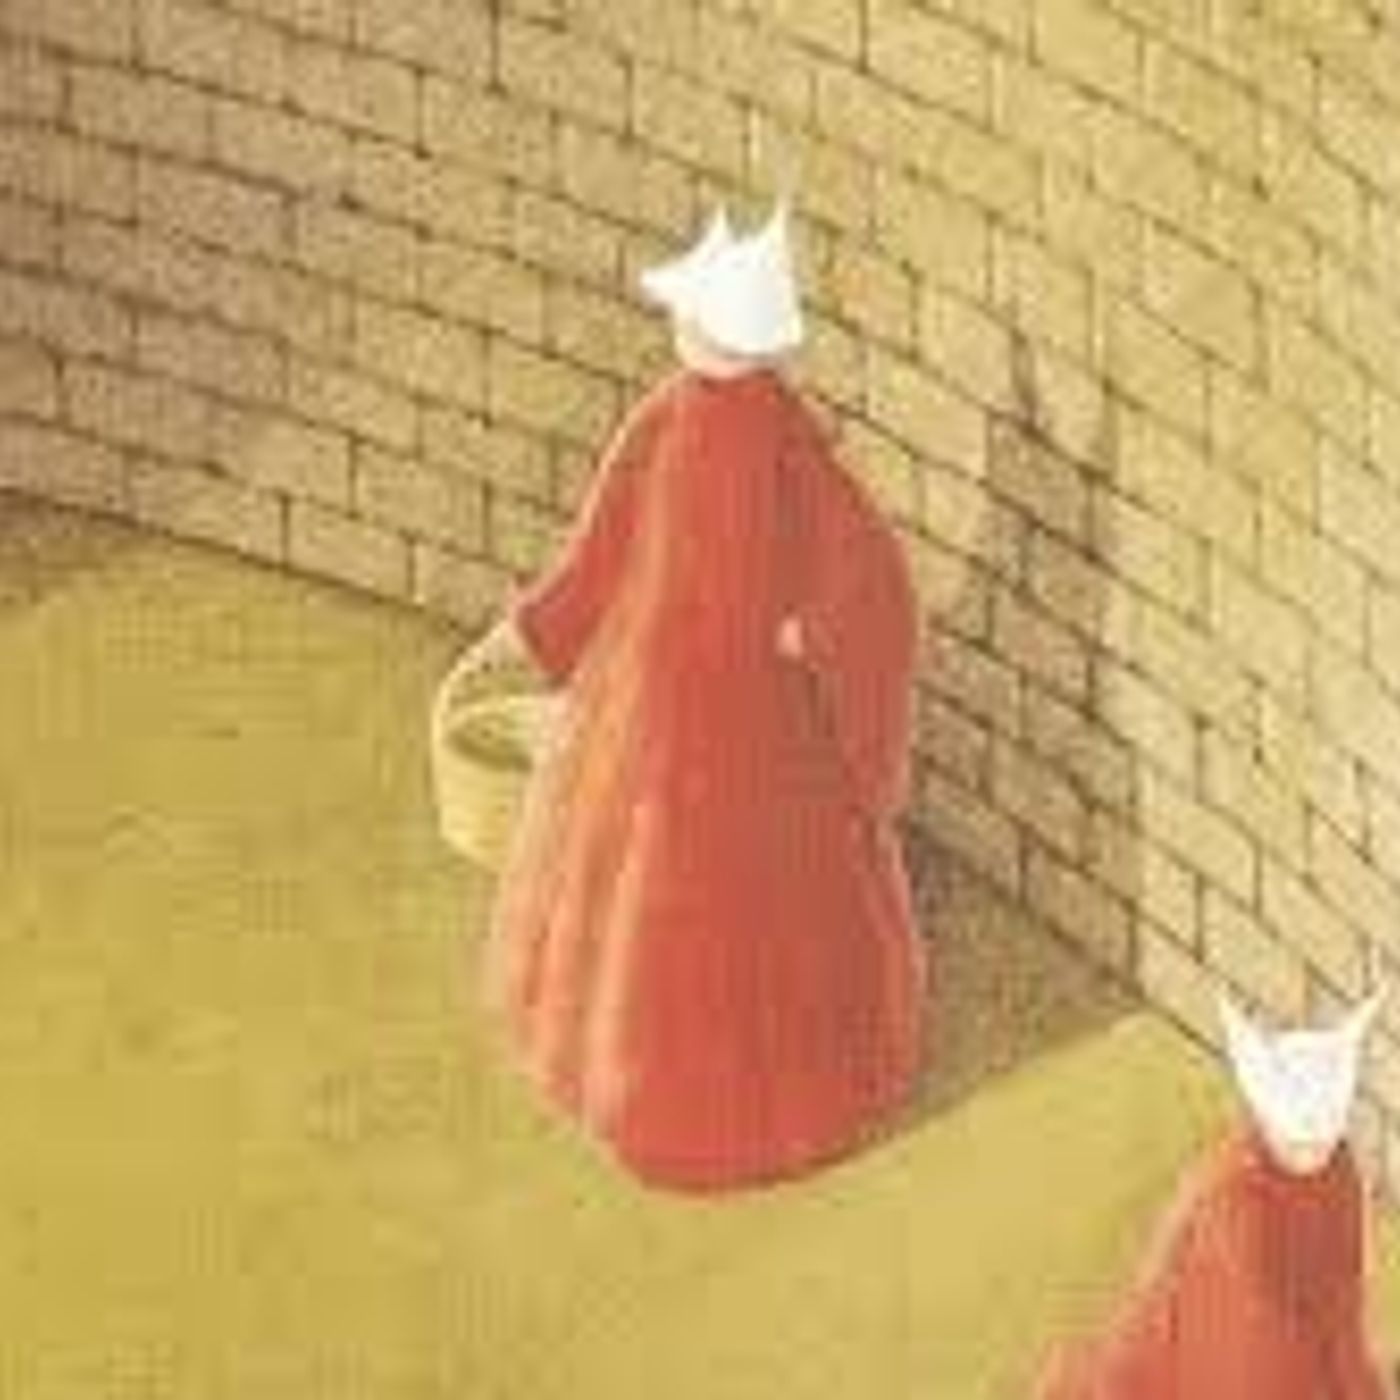 Episode 4: The Handmaid’s Tale